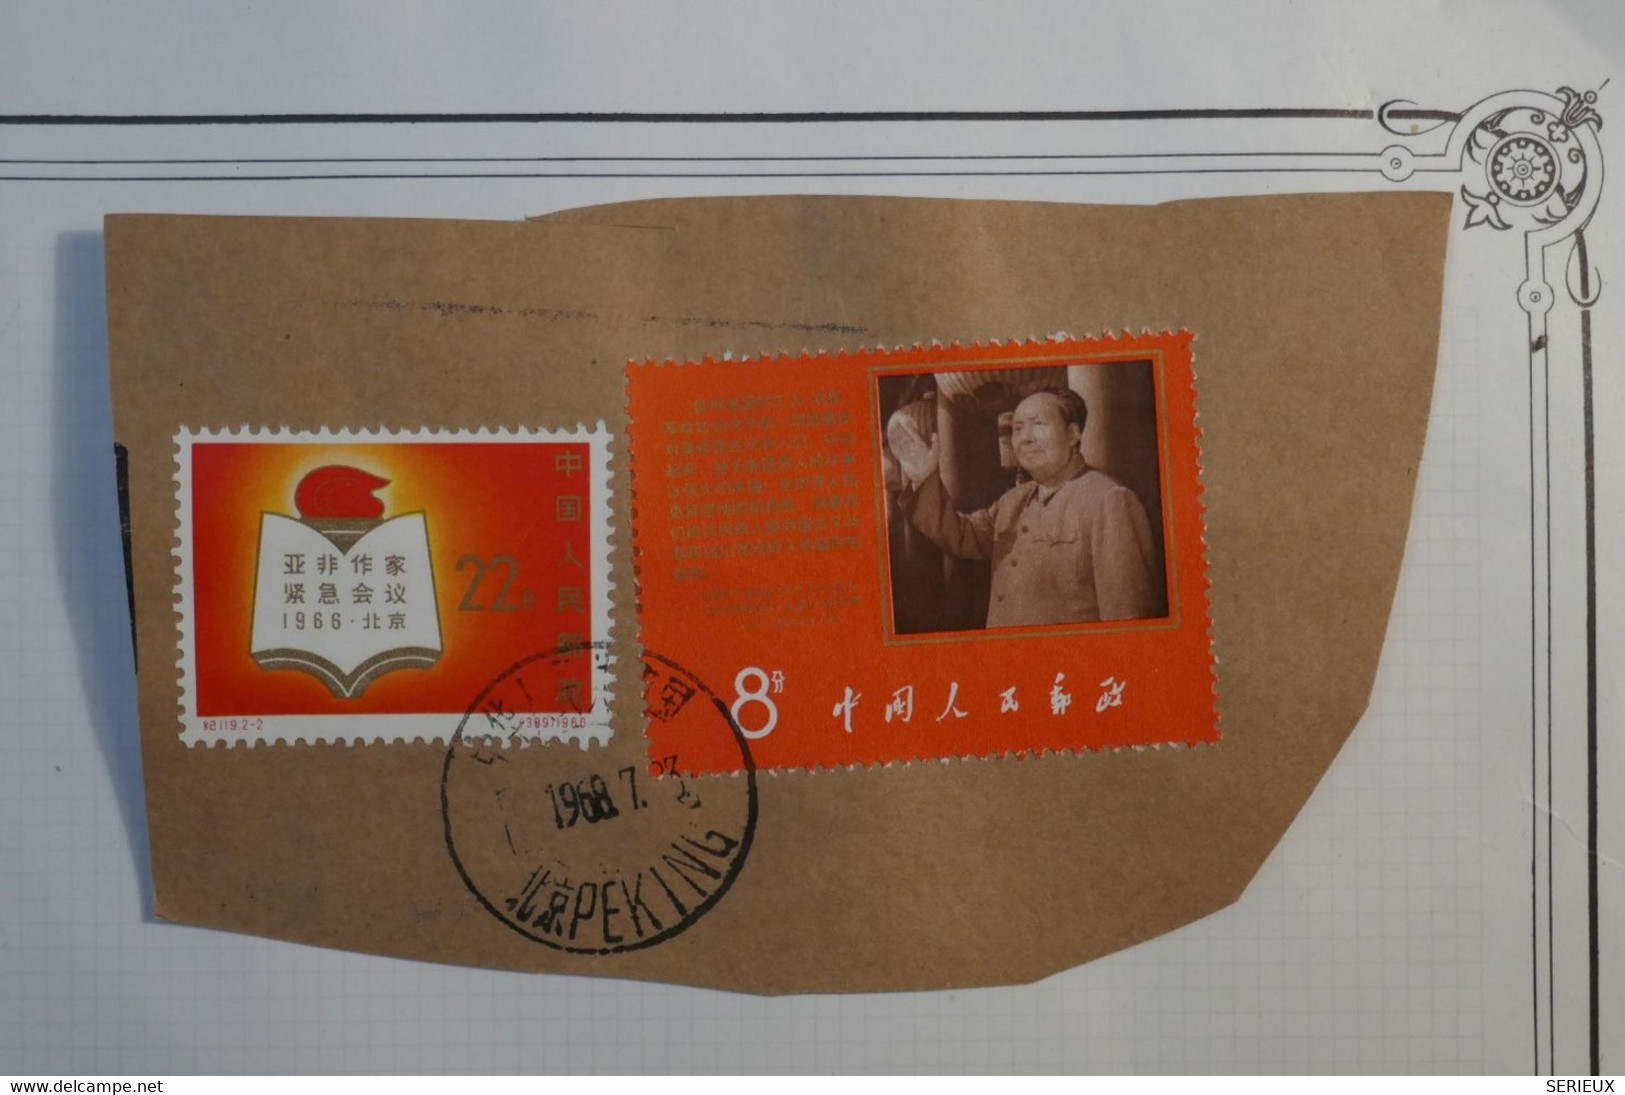 C CHINA  RARE STAMPS ON LETTER FRAGMENTS LUXE ++ 1968 PEKIN BEJIN TO FRANCE ++ + MAO + + PLEASANT  READABLE OBLITERATION - Covers & Documents